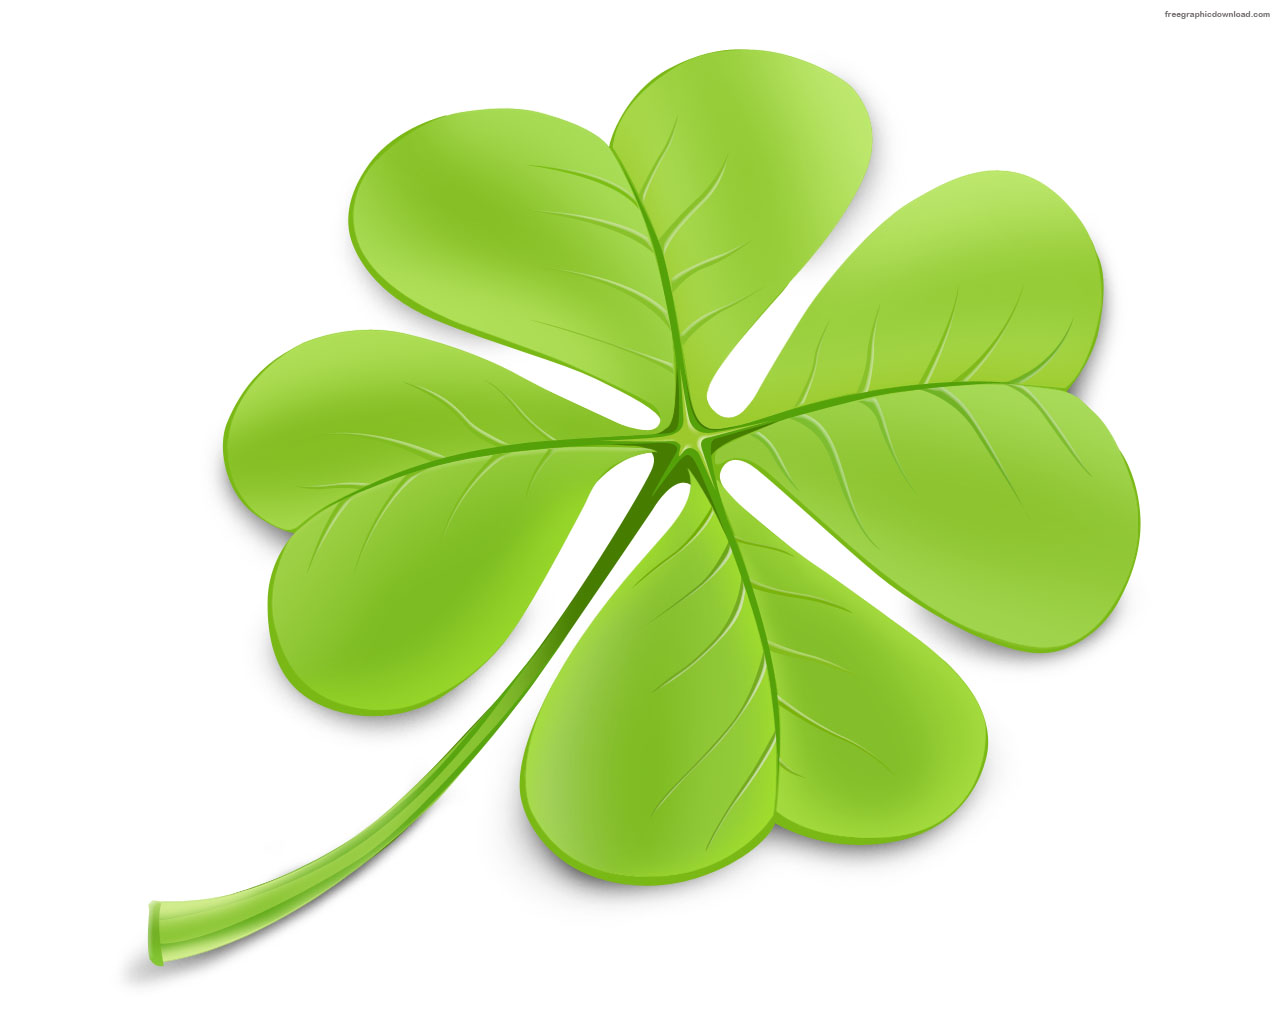 Clover Leaf - ClipArt Best